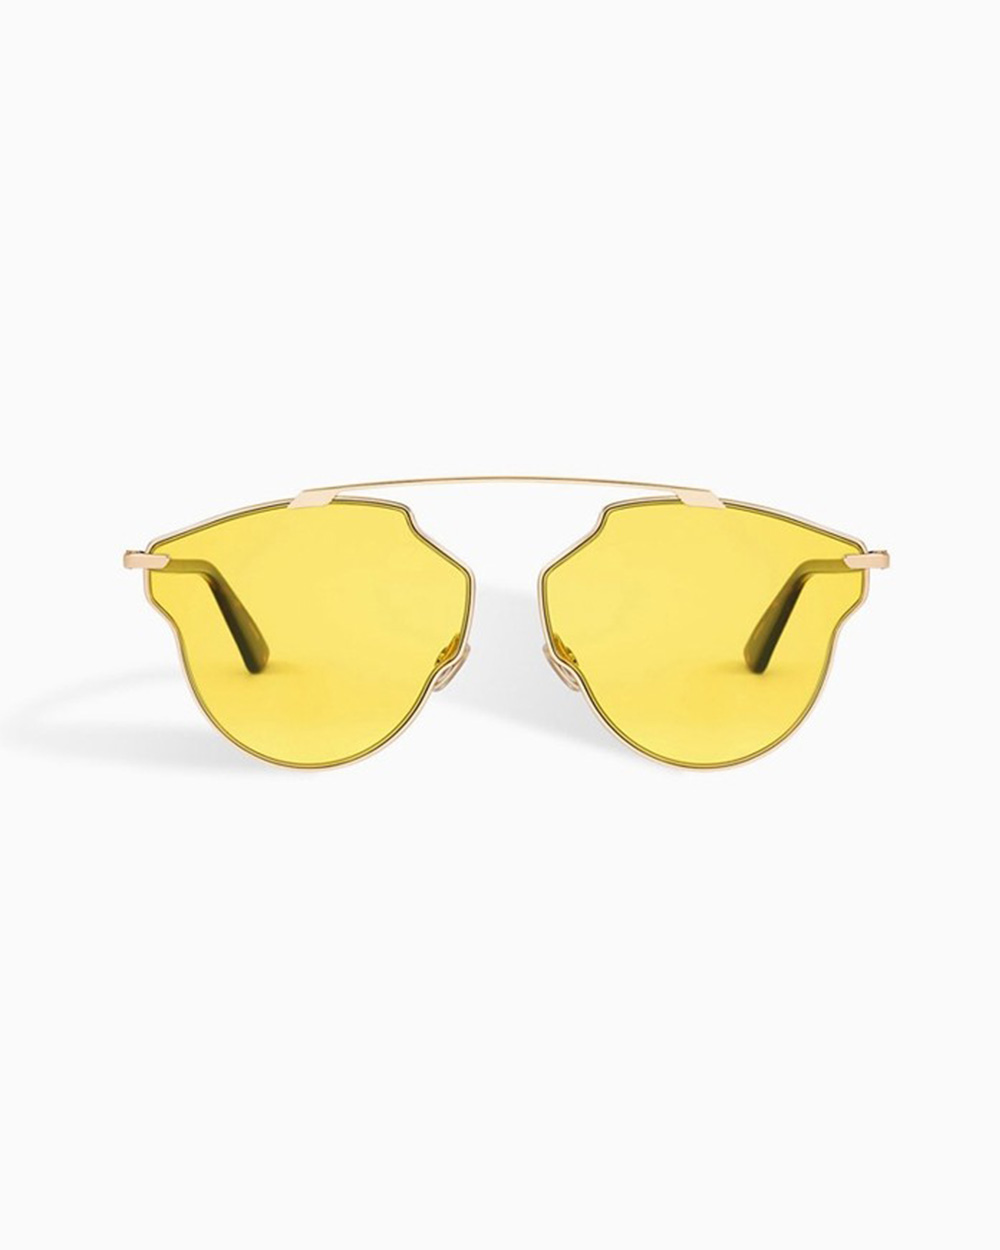 Dior sunglasses, $599 (was $699) from Superette